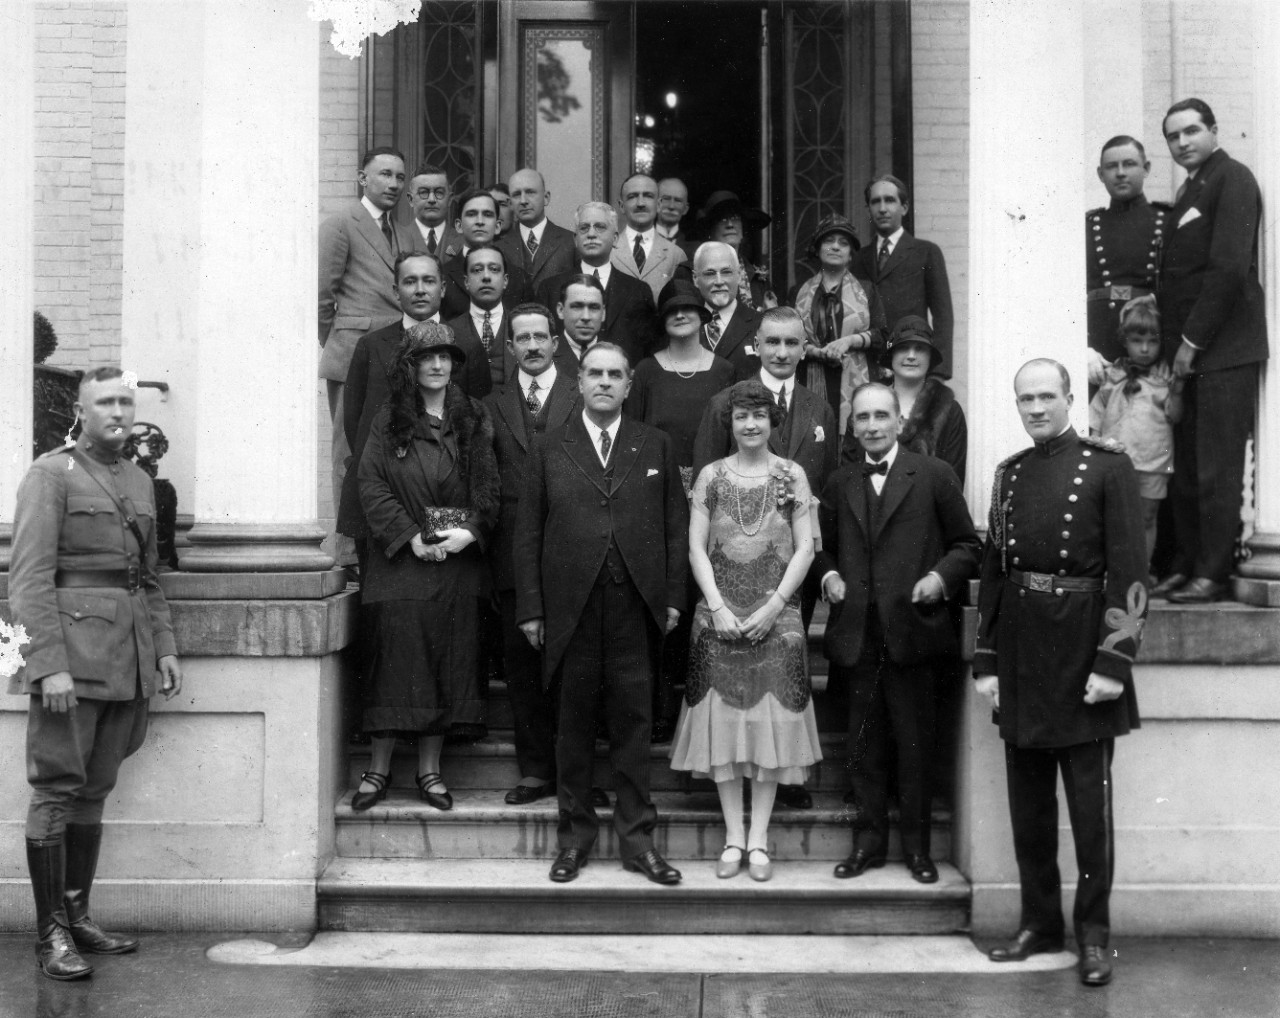 Album of 26 photographs commemorating the 11-14 May 1925 Pan American visit in Virginia. Book presented by the Virginia State Chamber of Commerce. This particular copy is inscribed to Rear Admiral Roger Welles who was Commandant of the 5th Naval District and also of the Naval Operating Base at Hampton Roads. Shown are foreign dignitaries and US Navy personnel (including RADM Welles) at US naval bases and airfields (possibly Hampton Roads) touring drydock, battleships, and observing aircraft in formation flight. Vinyl album binder suffered from serious mold issues, and was not retained.